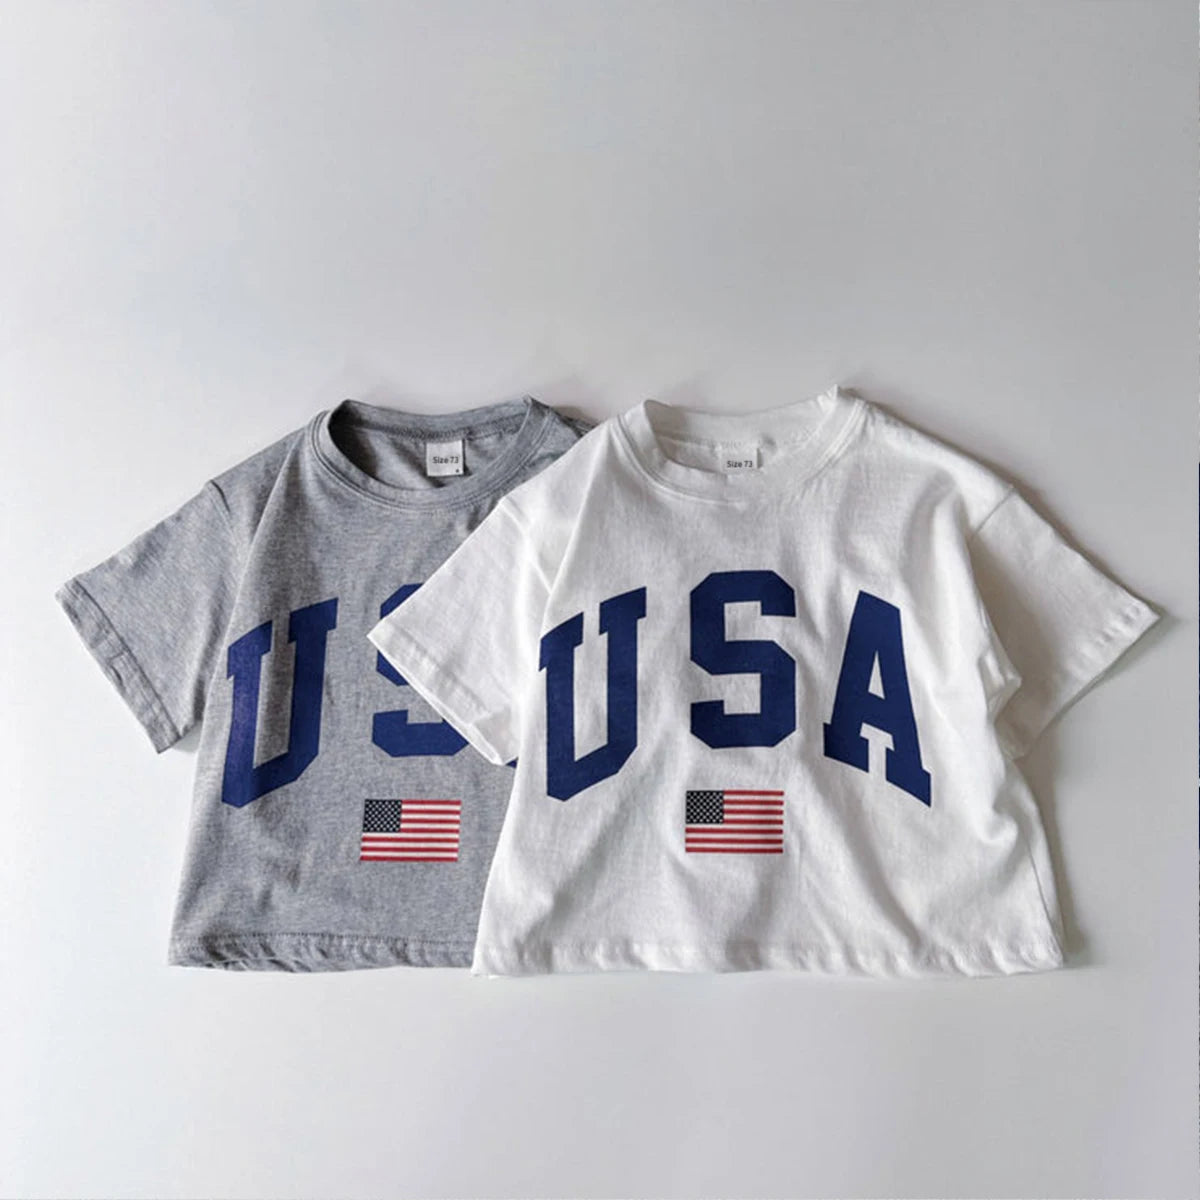 Emma Oversized USA Print Cotton Casual Tops Infant Outfit